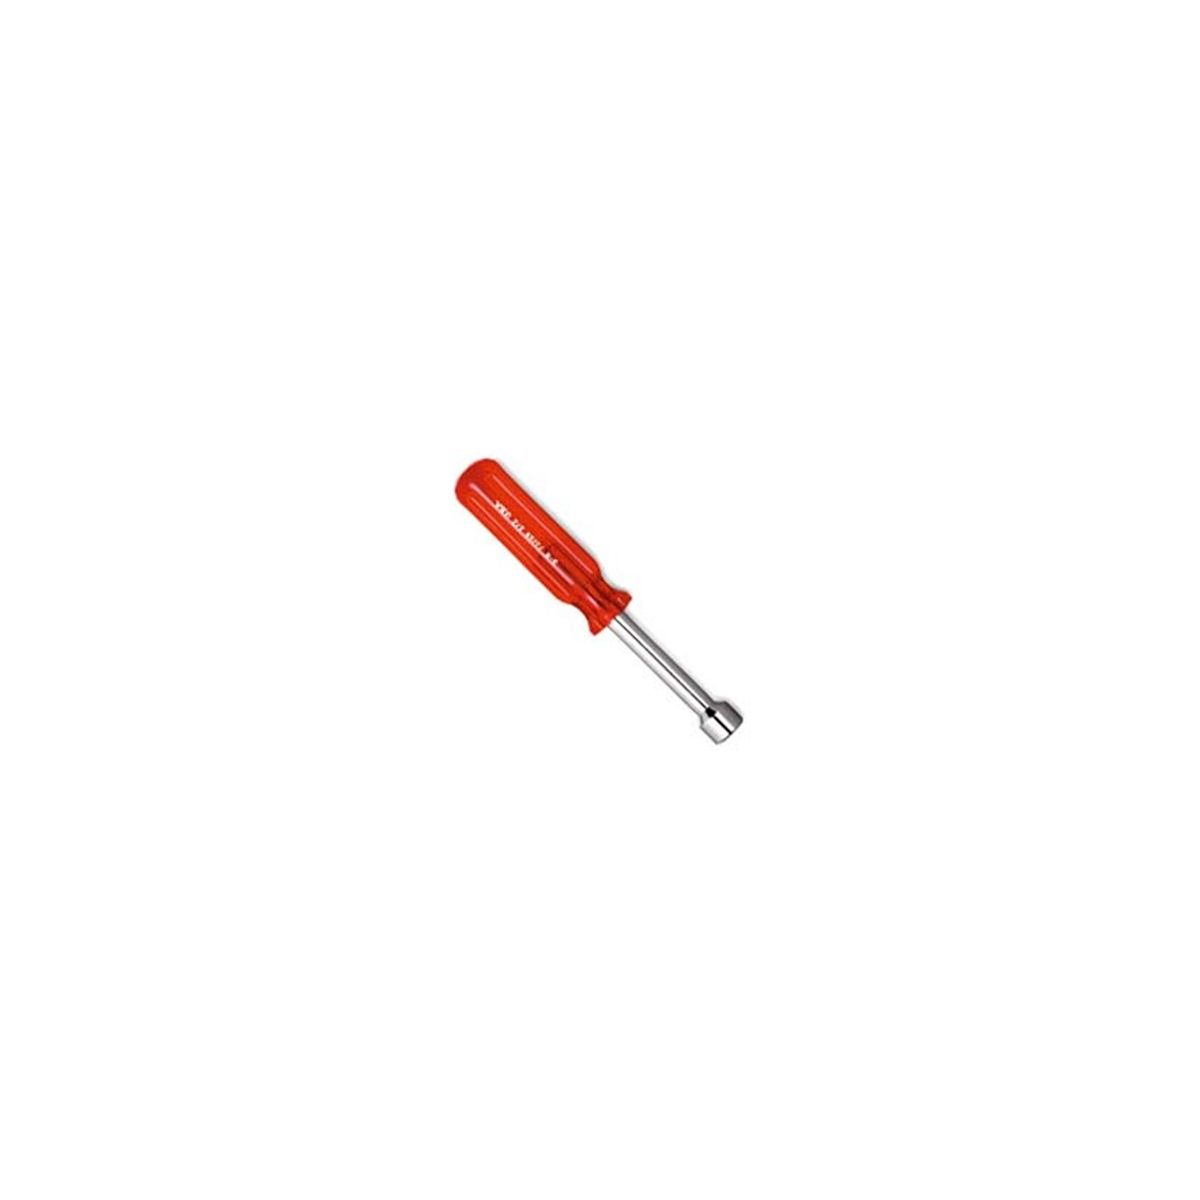 Fractional Hex Nut Driver - 11/32 In x 6.63 In